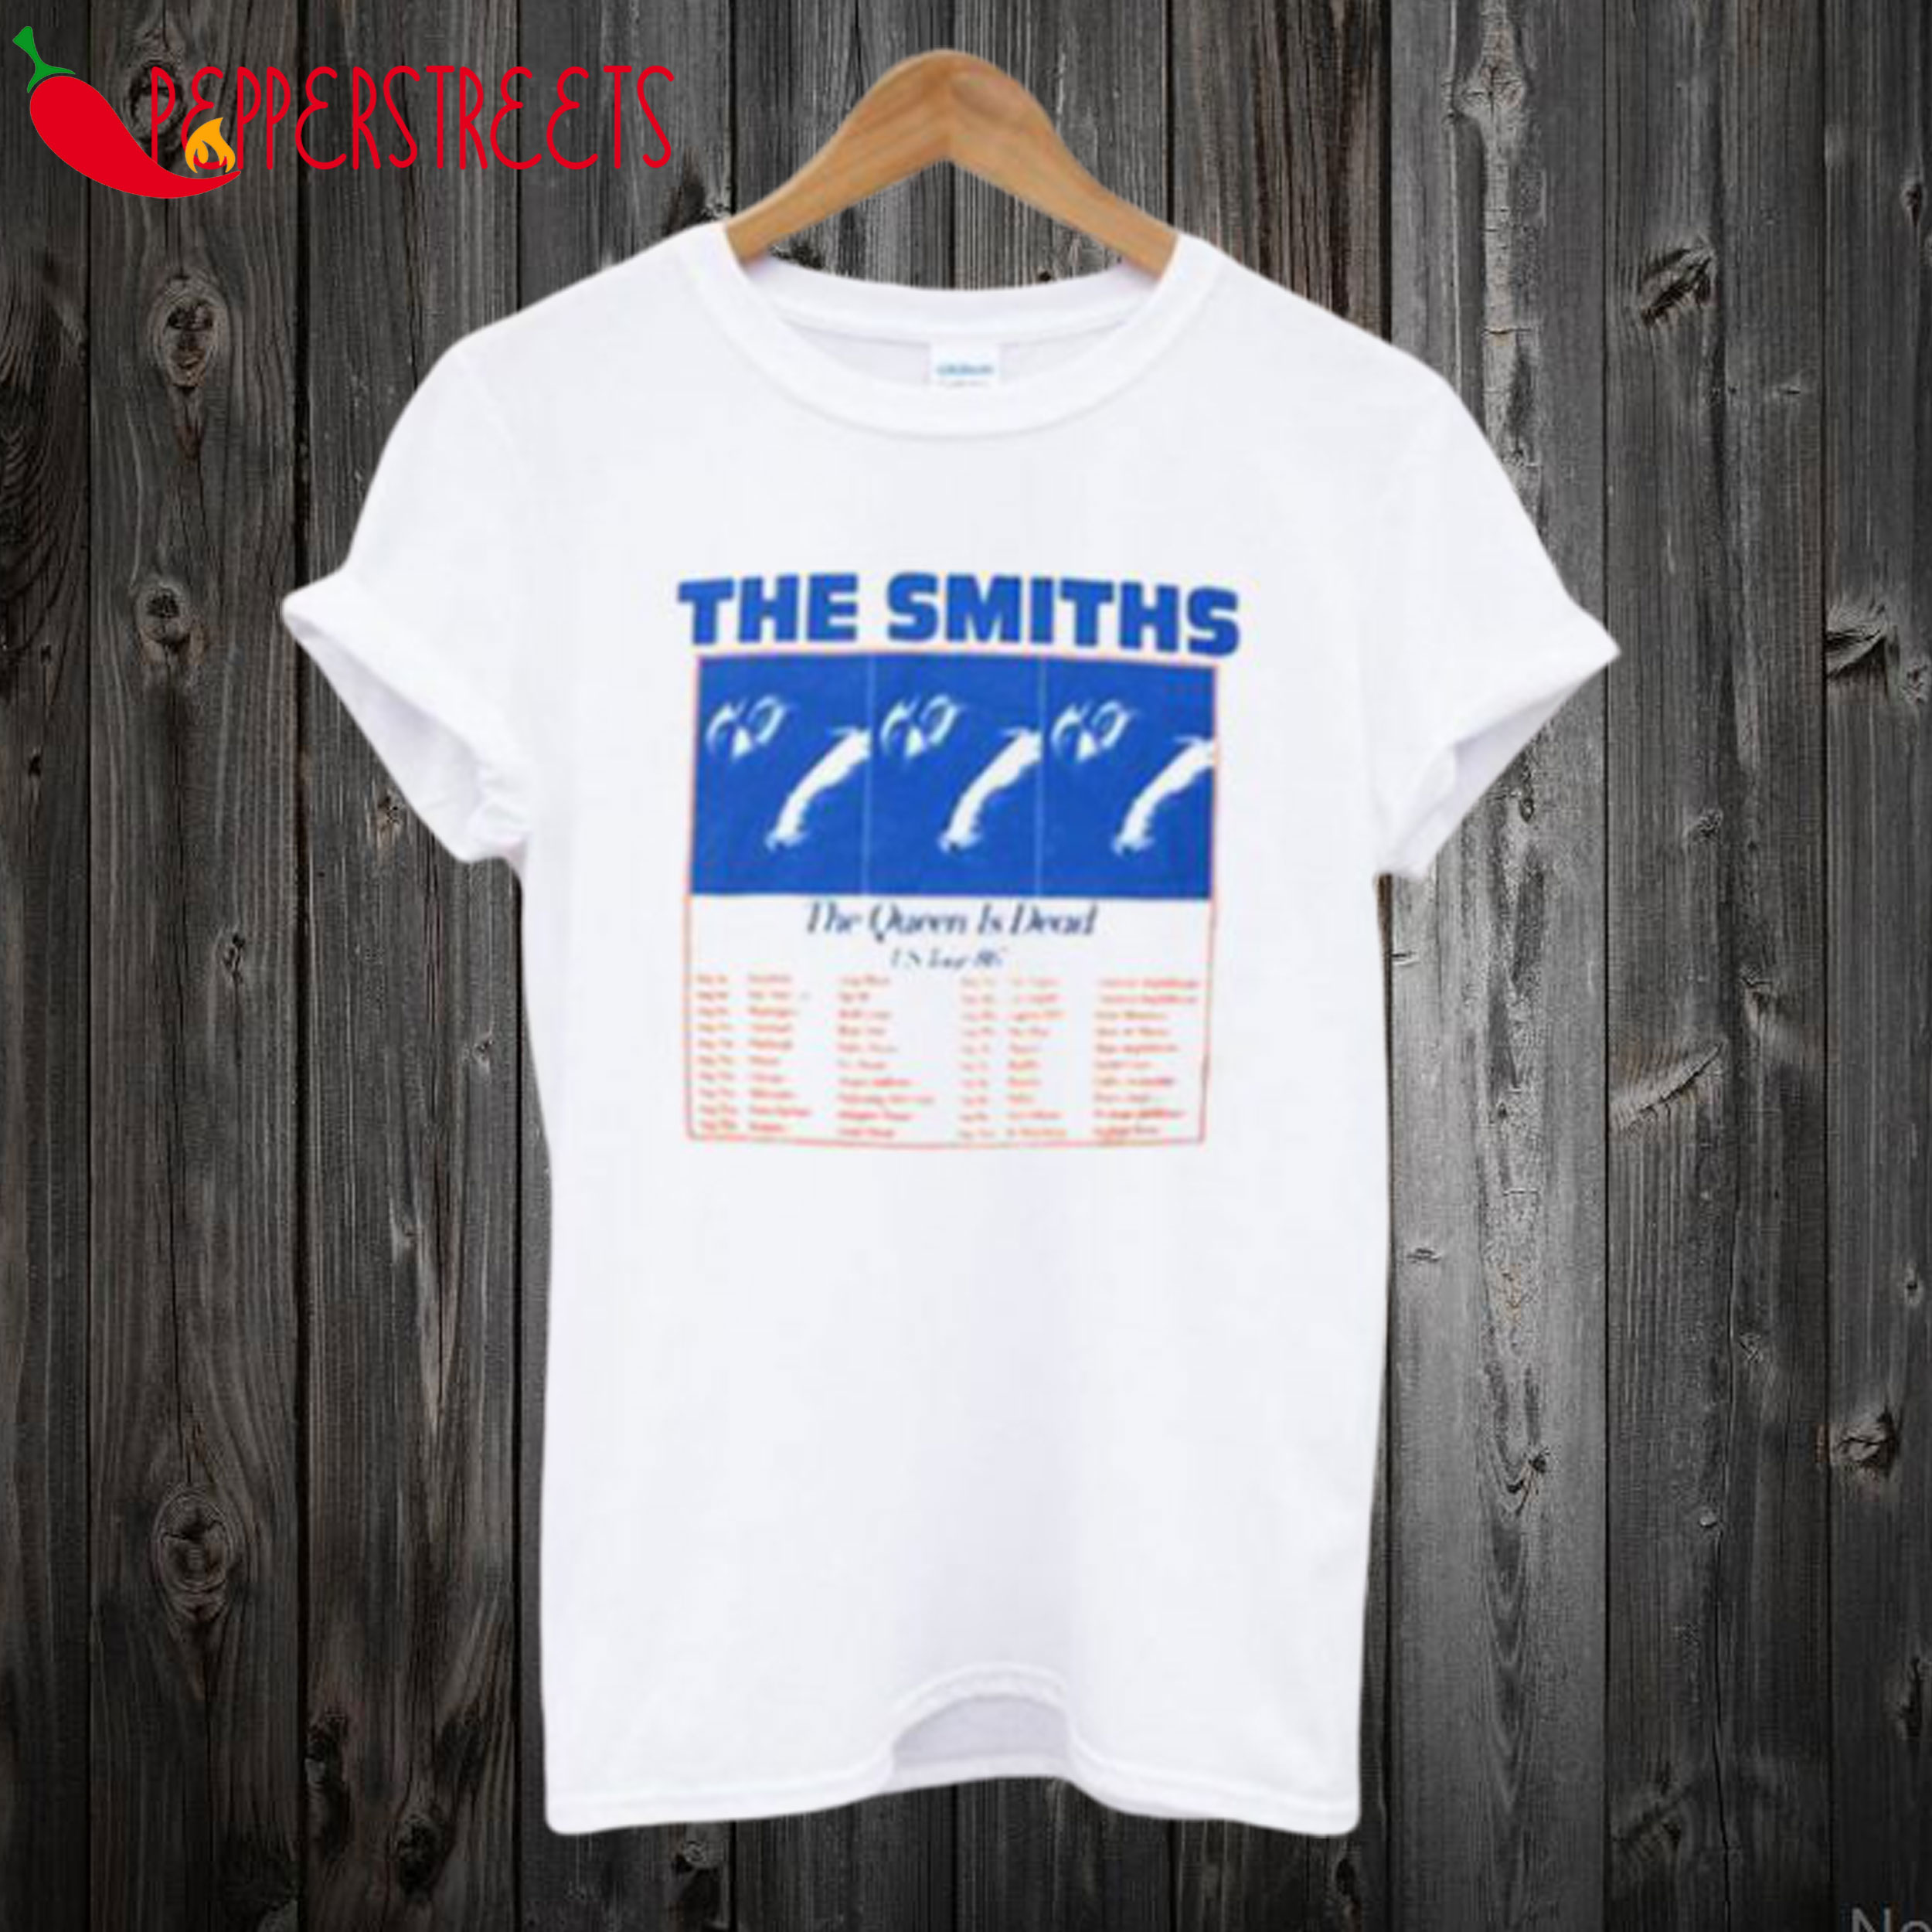 The Smiths The Queen Is Dead US Tour 86 T-shirt